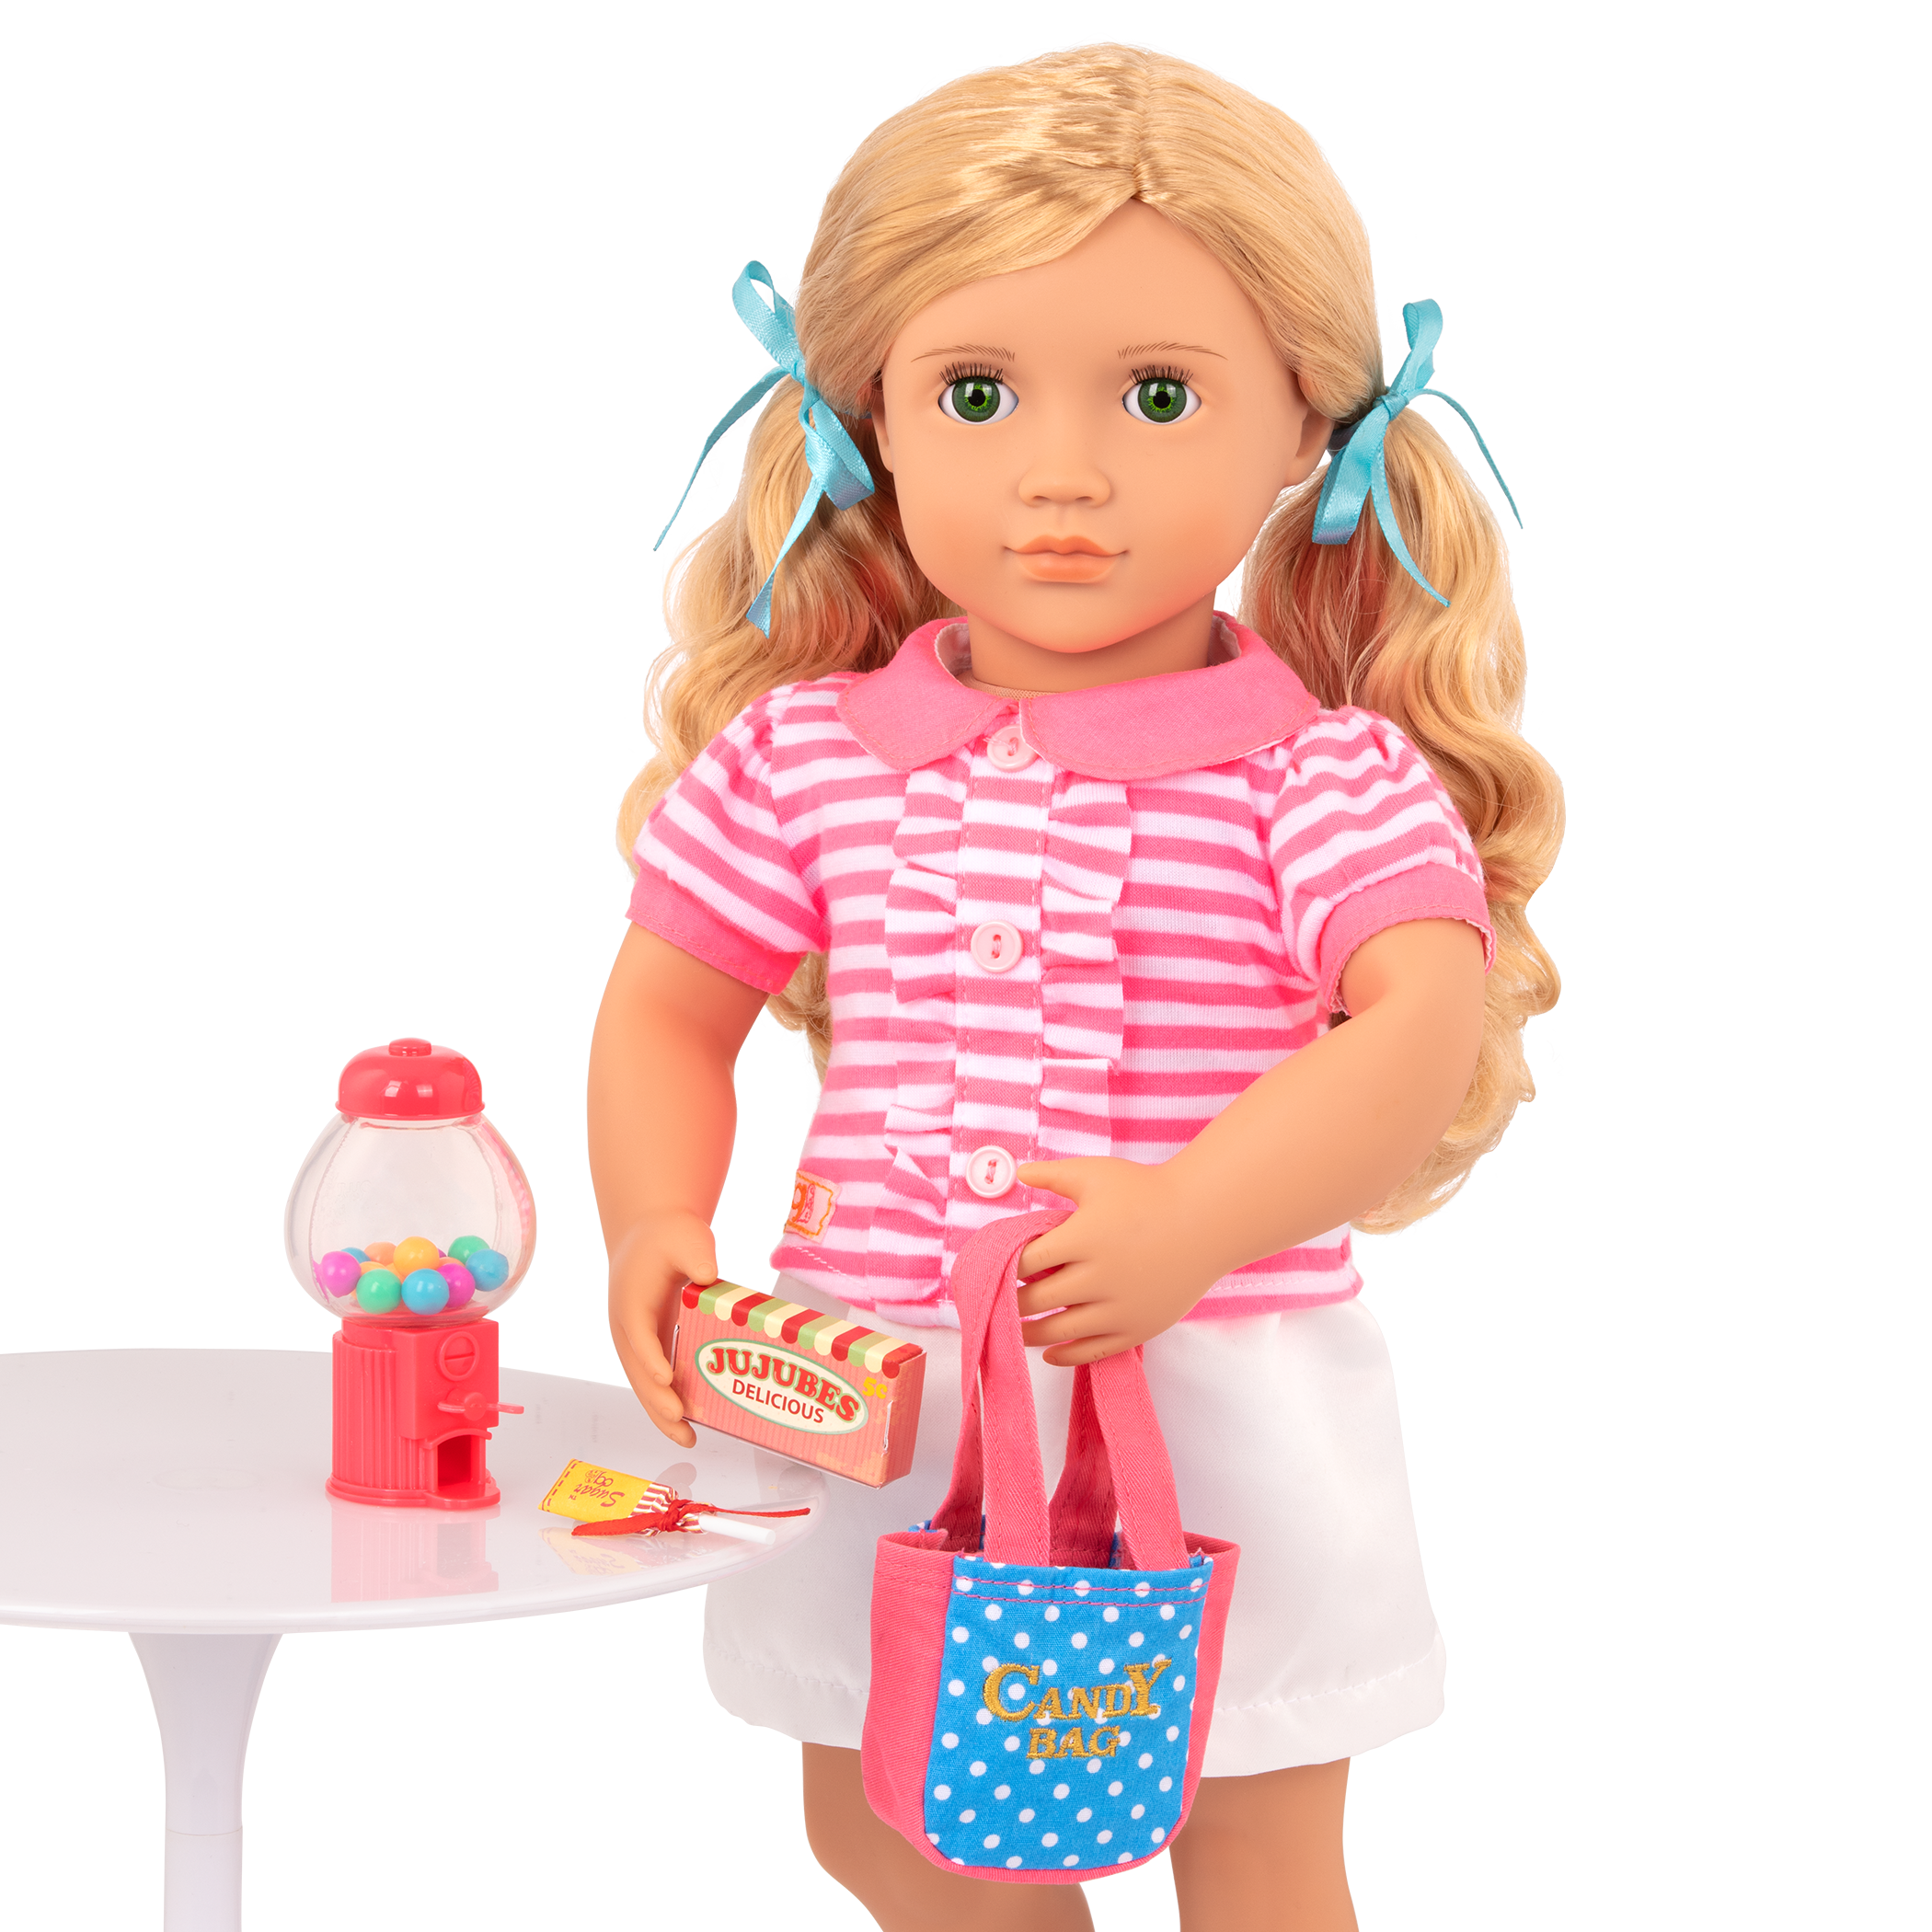 Treats and Sweets Gumball Machine for 18-inch Dolls